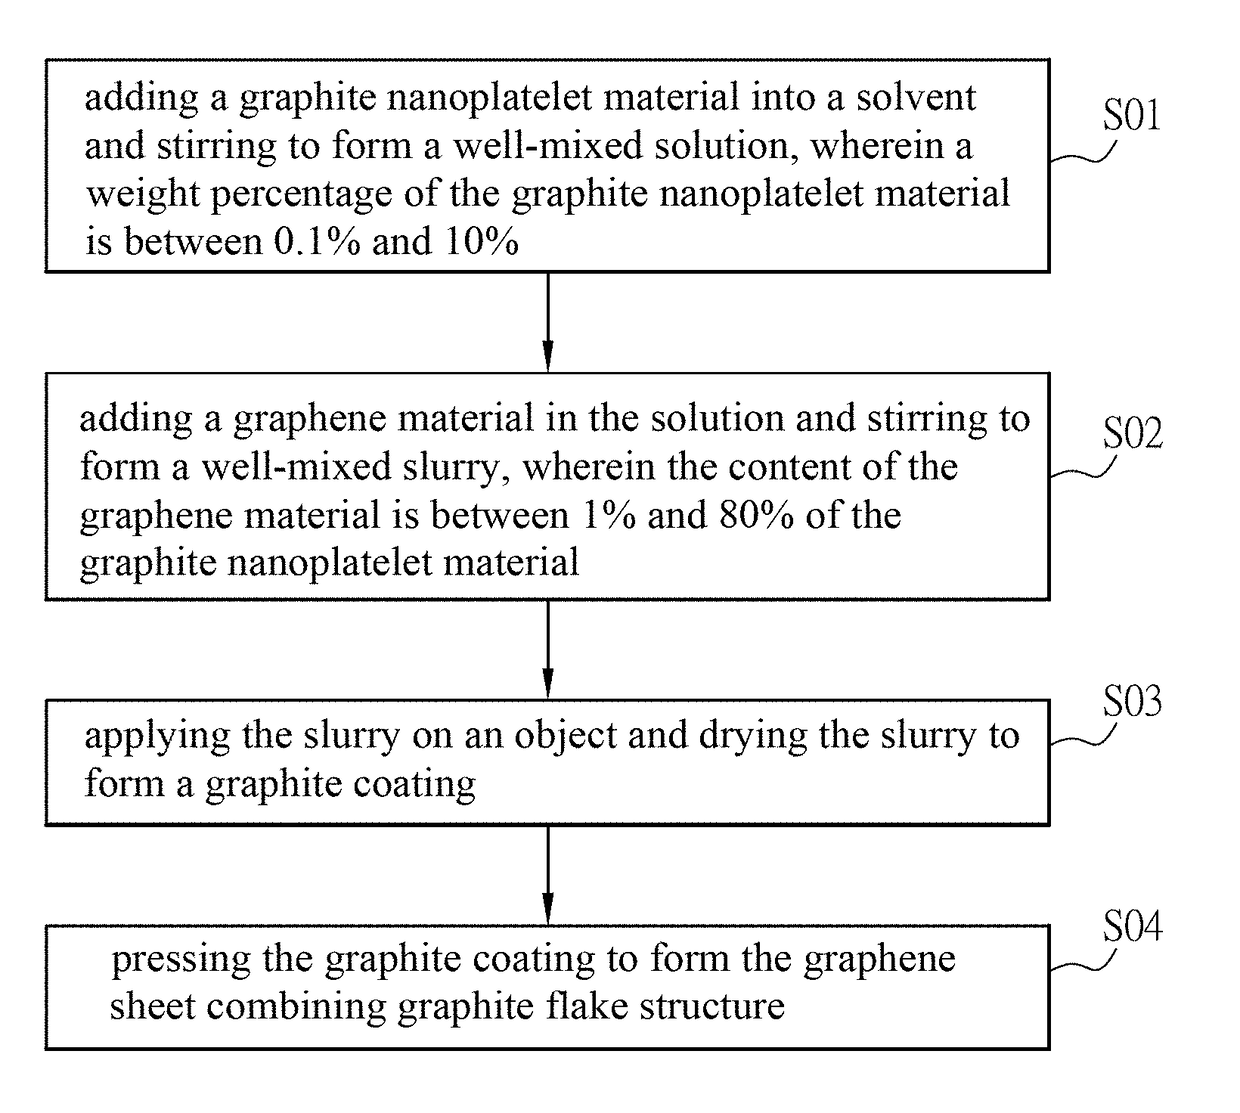 Slurry for manufacturing graphene sheet combining graphite flake structure